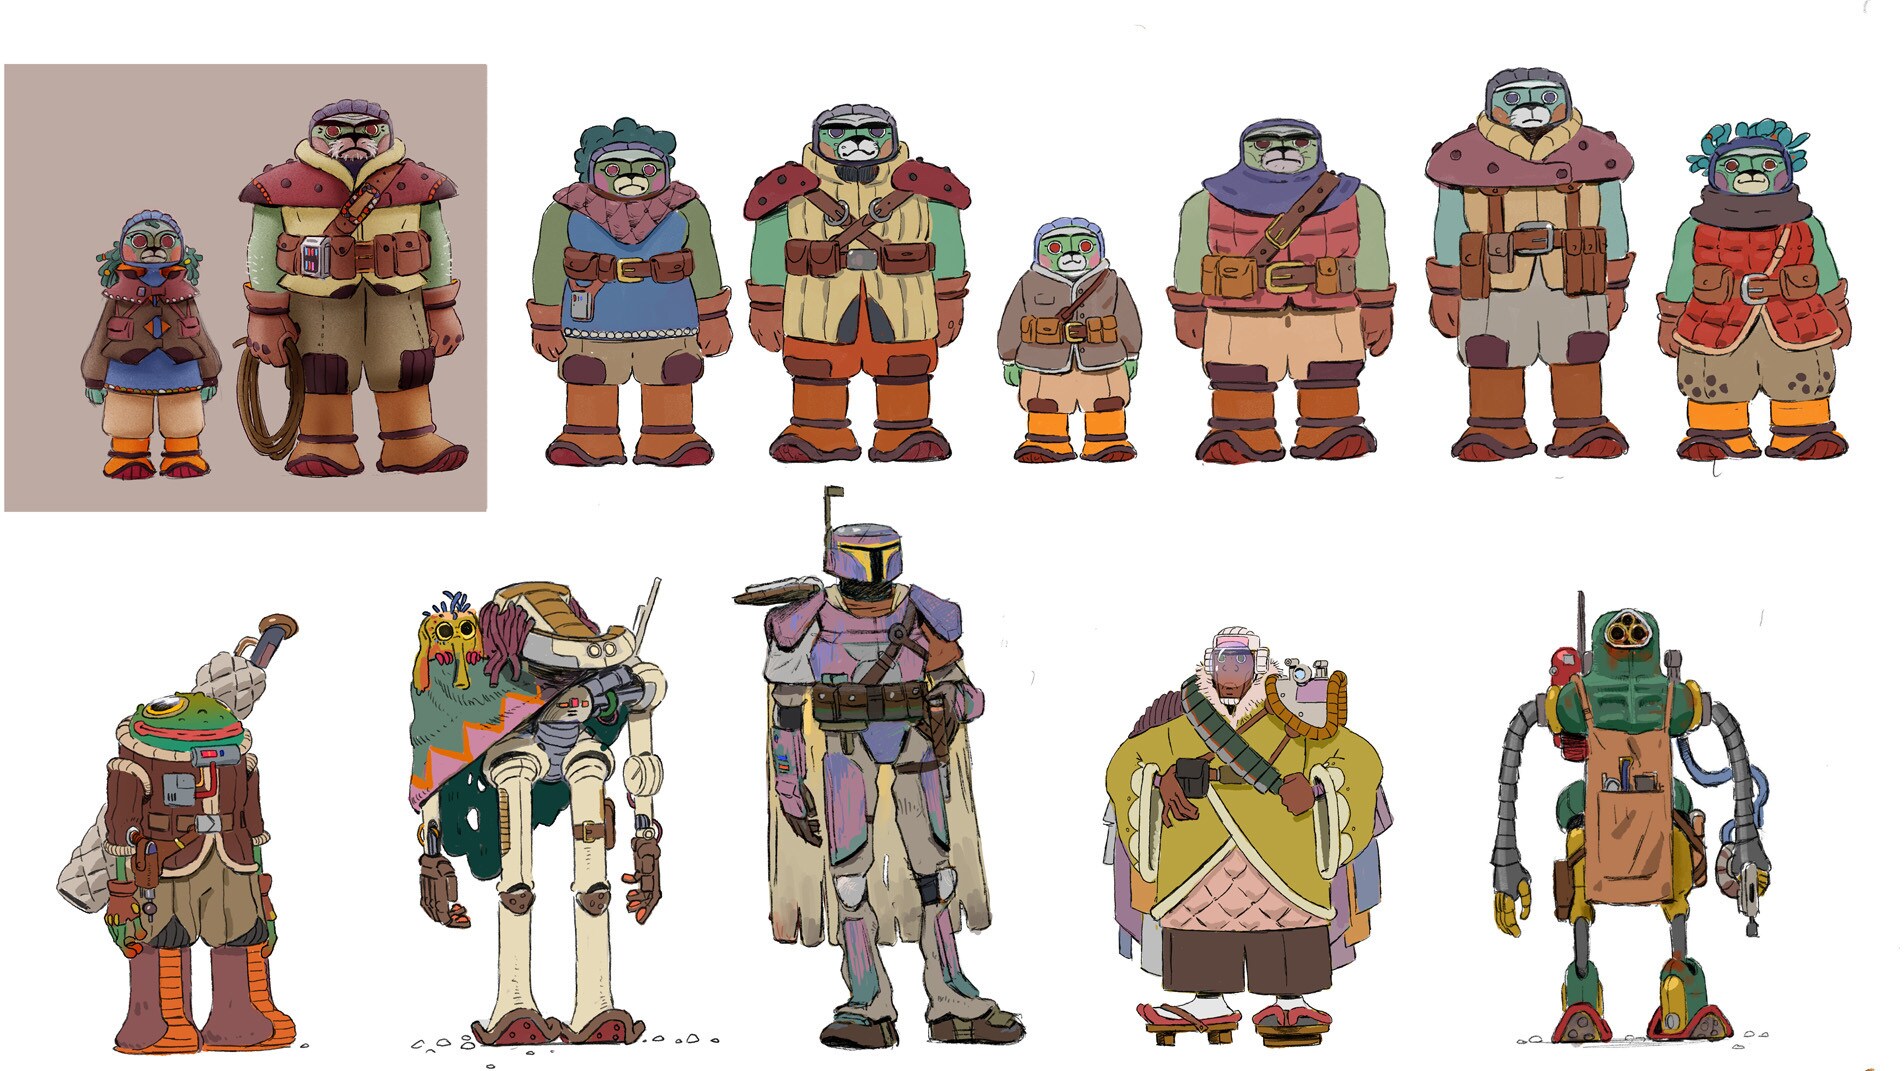 Characters of "Aau's Song" concept art by Daniel Clarke